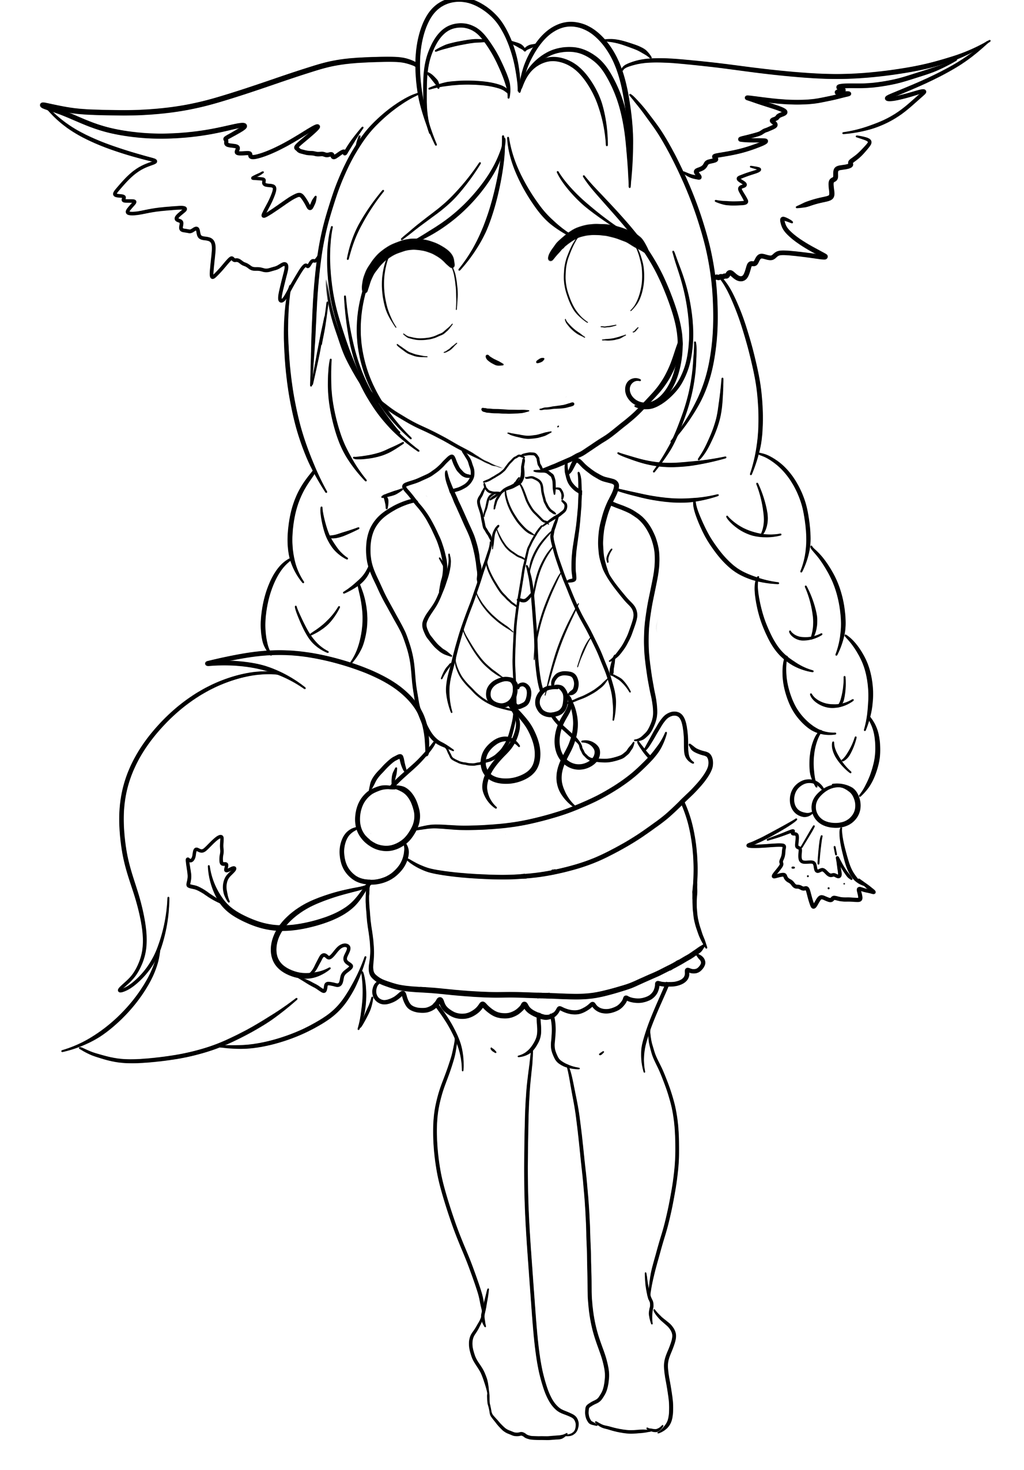 Best Photos of Anime Fox Coloring Pages - Cute Anime Chibi Cat ...